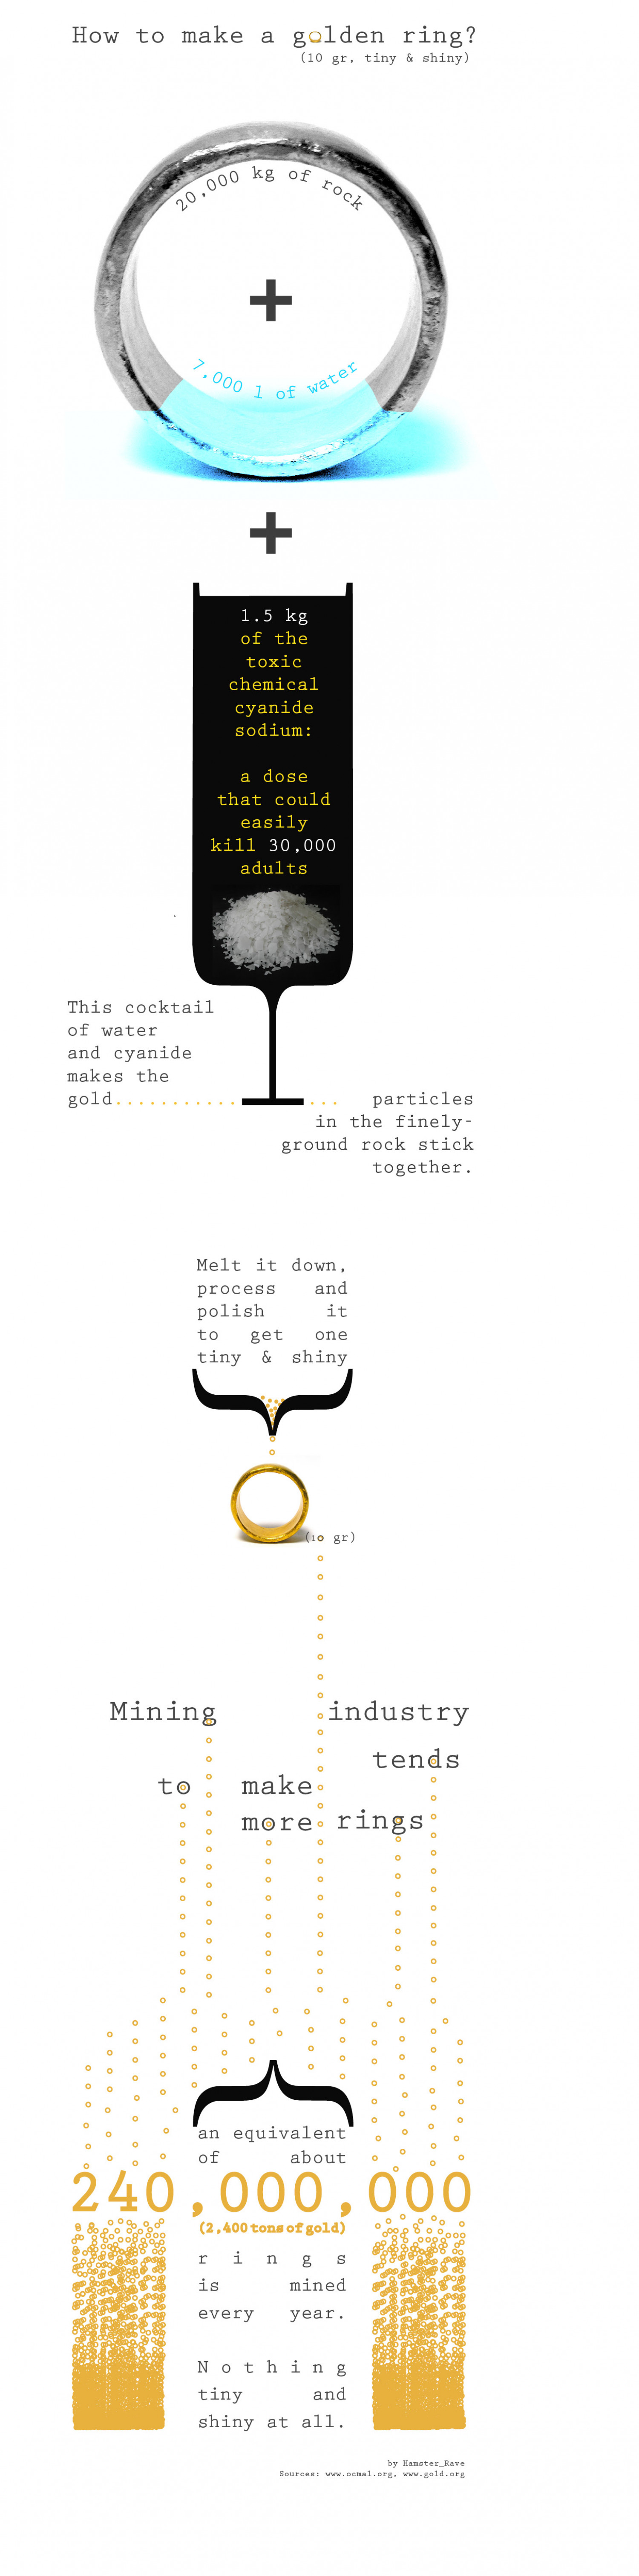 How to make a 10 gram golden ring Infographic